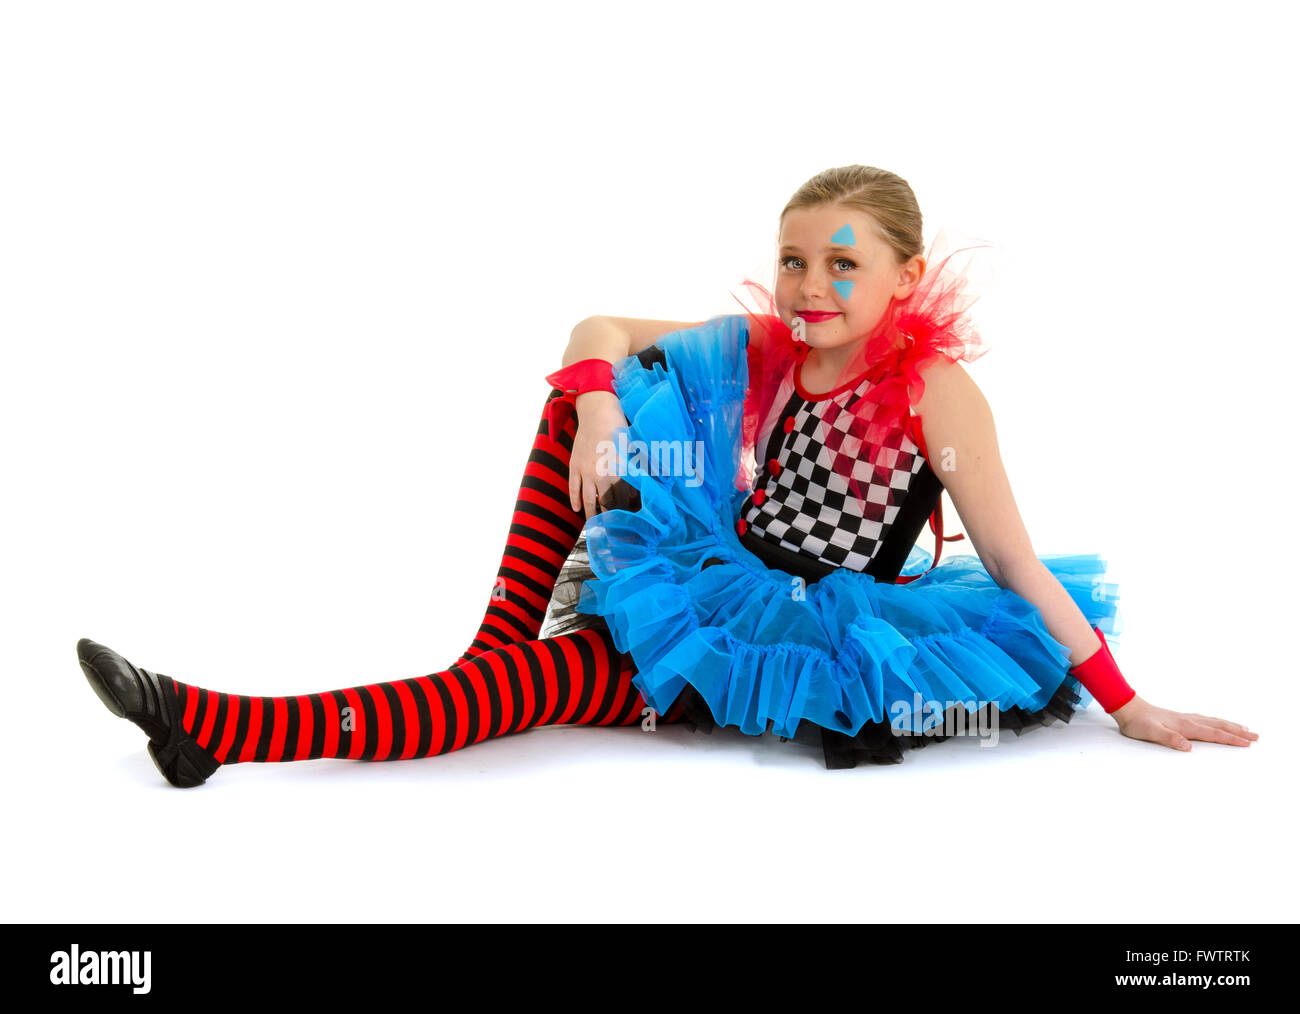 A Child Dance Performer Dressed in Circus Clow Costume Stock Photo